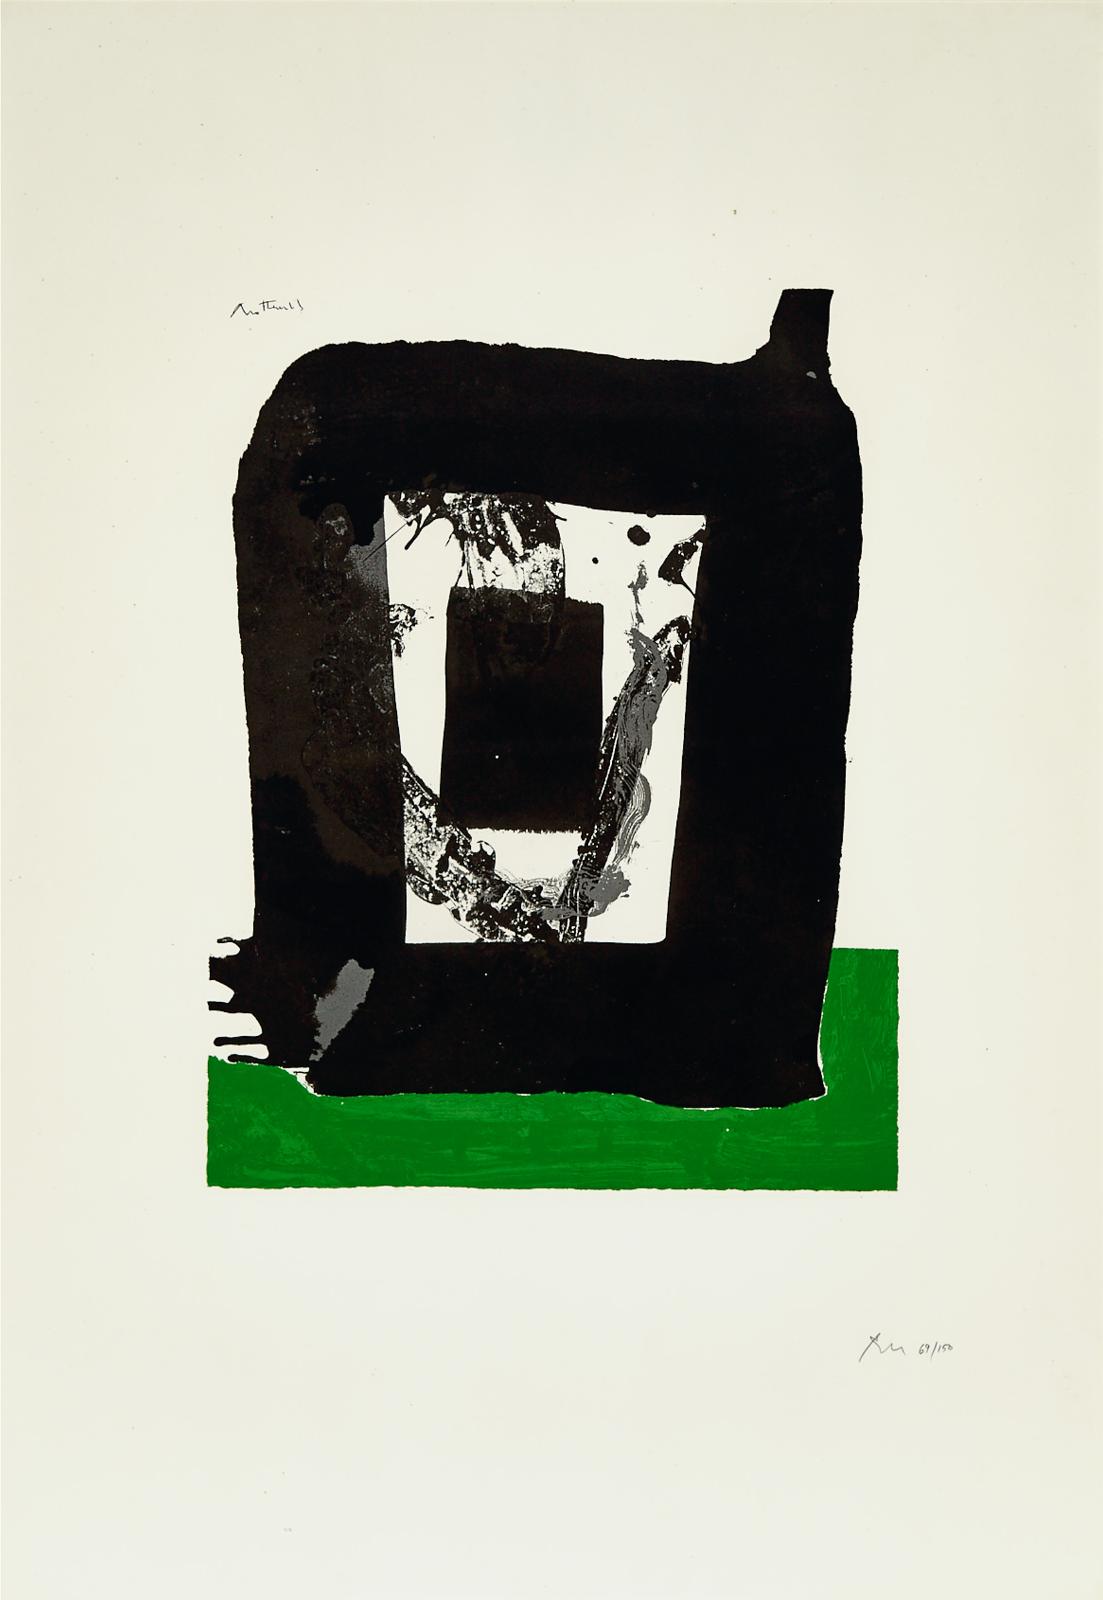 Robert Motherwell (1915-1991) - Untitled (From The Basque Suite, Plate 8), 1971 [belknap, 57]